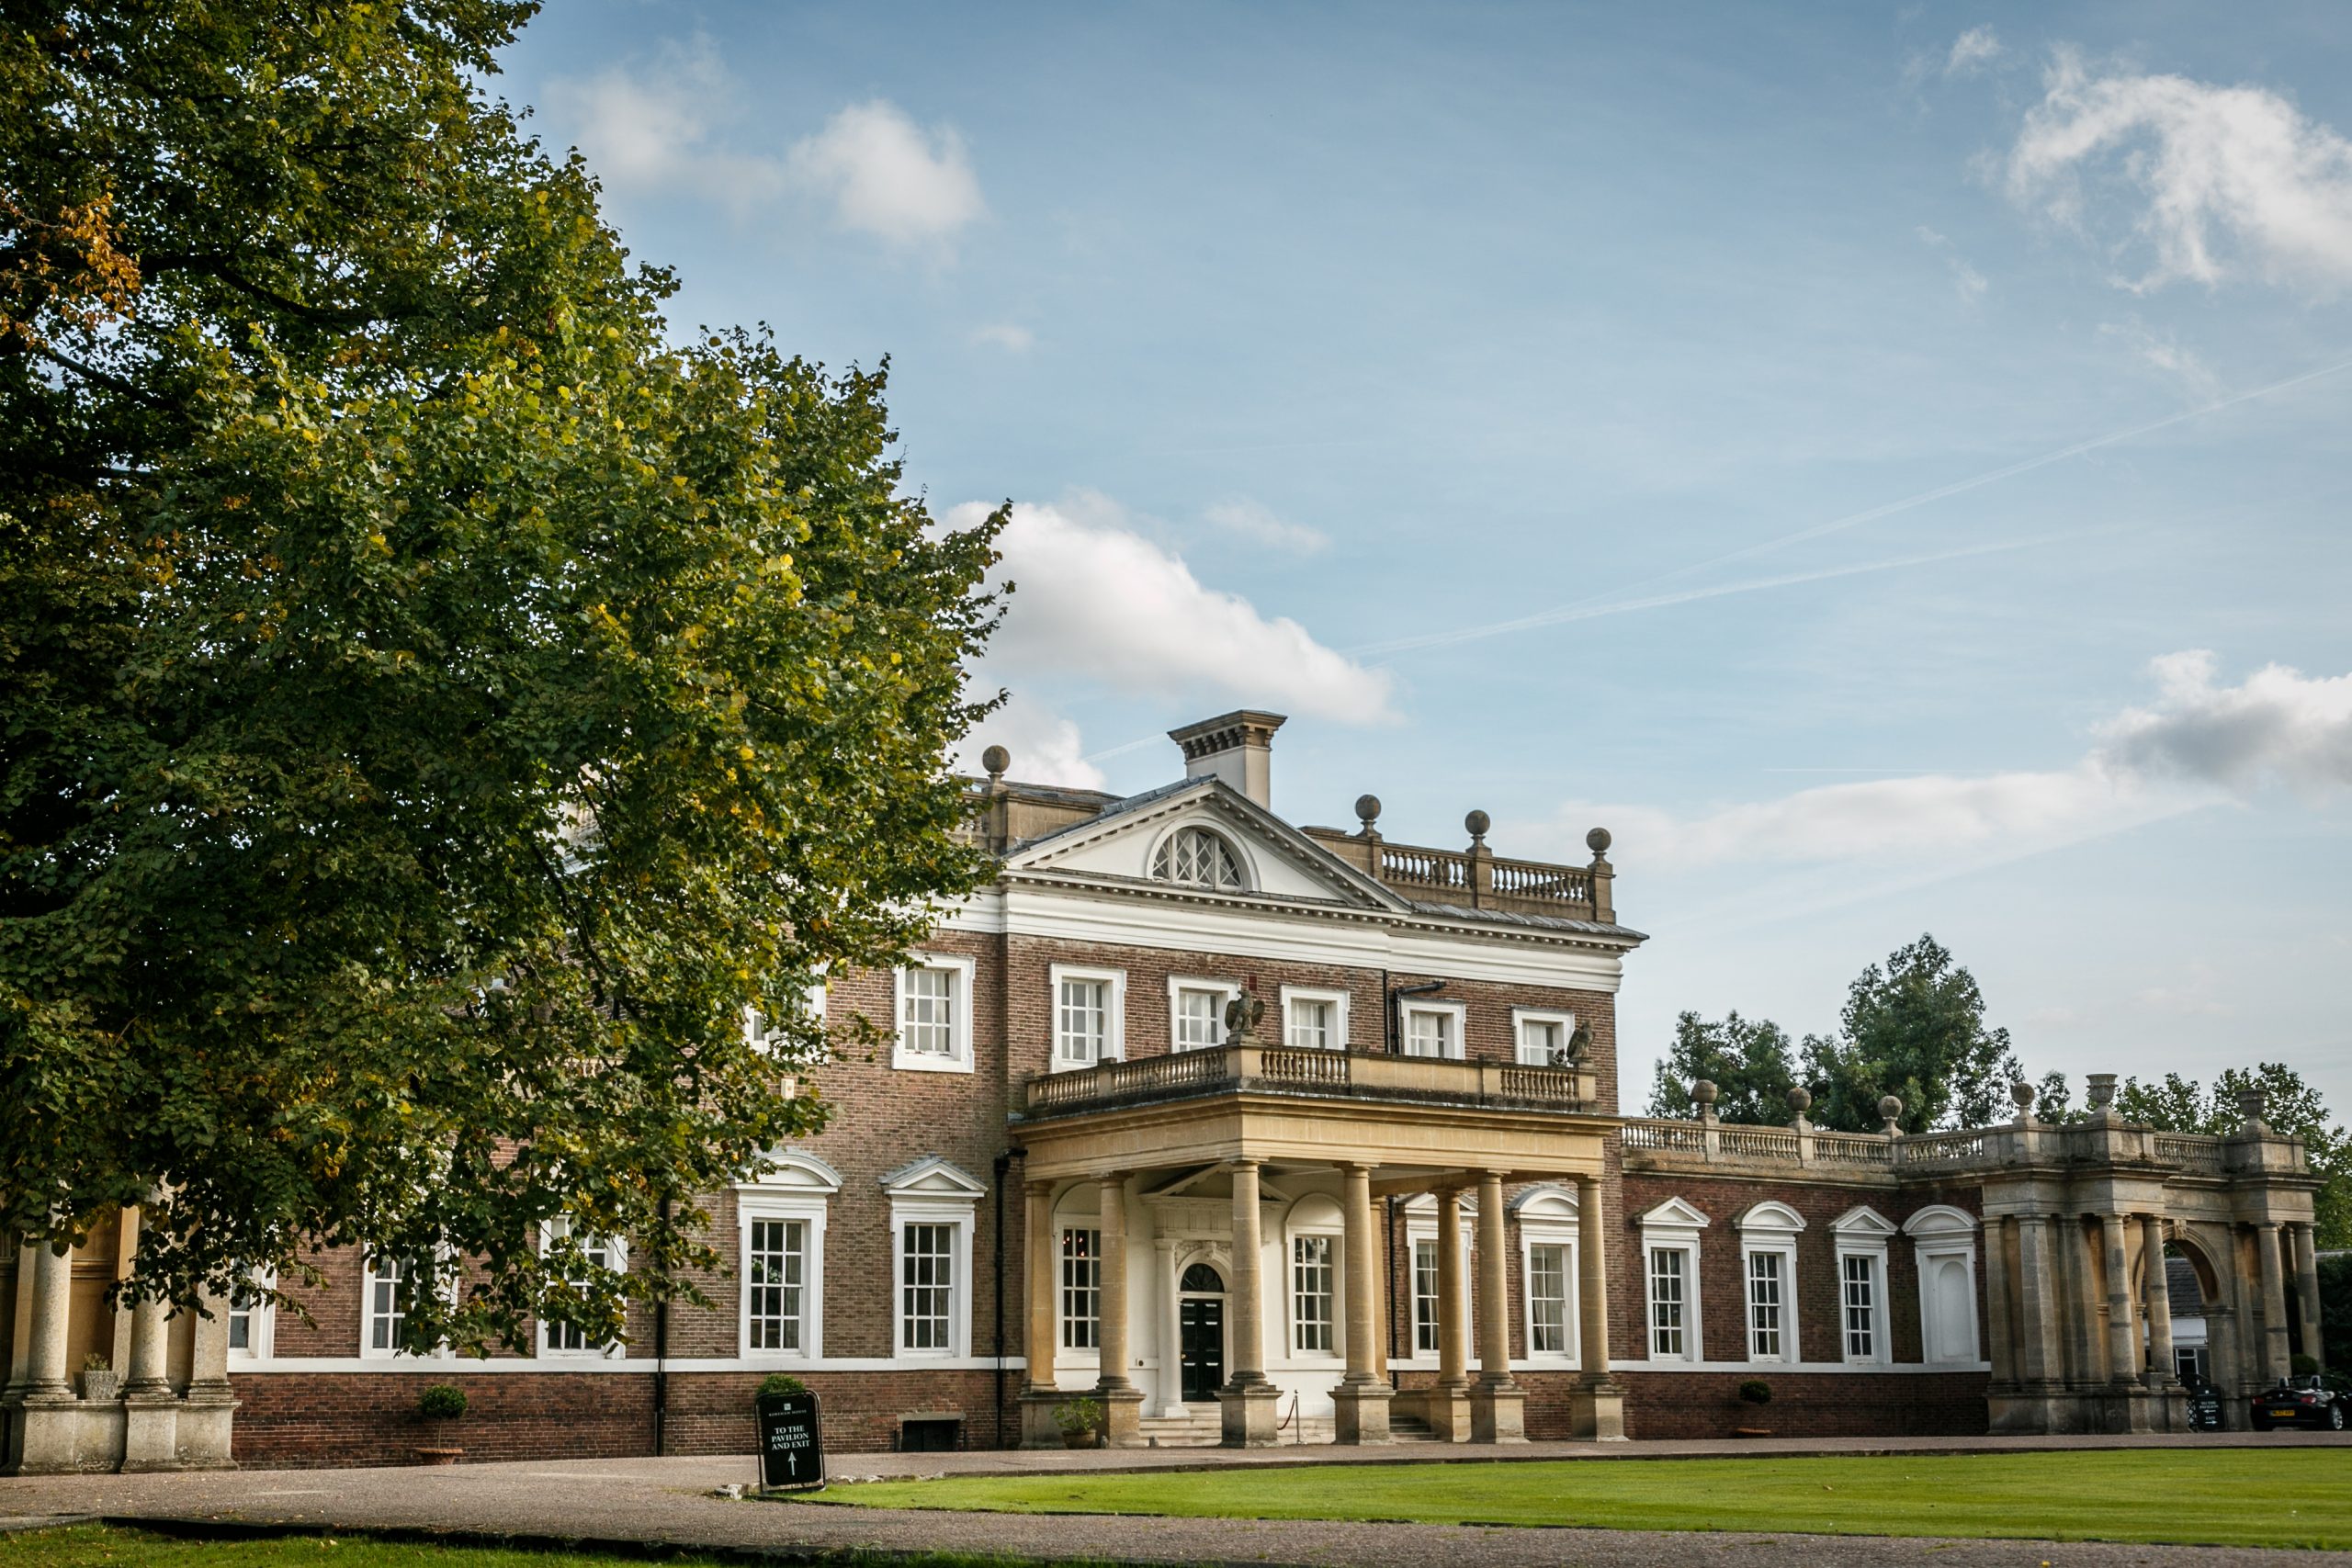 outside view of Boreham house wedding venue with green tree to the left and light blue sky